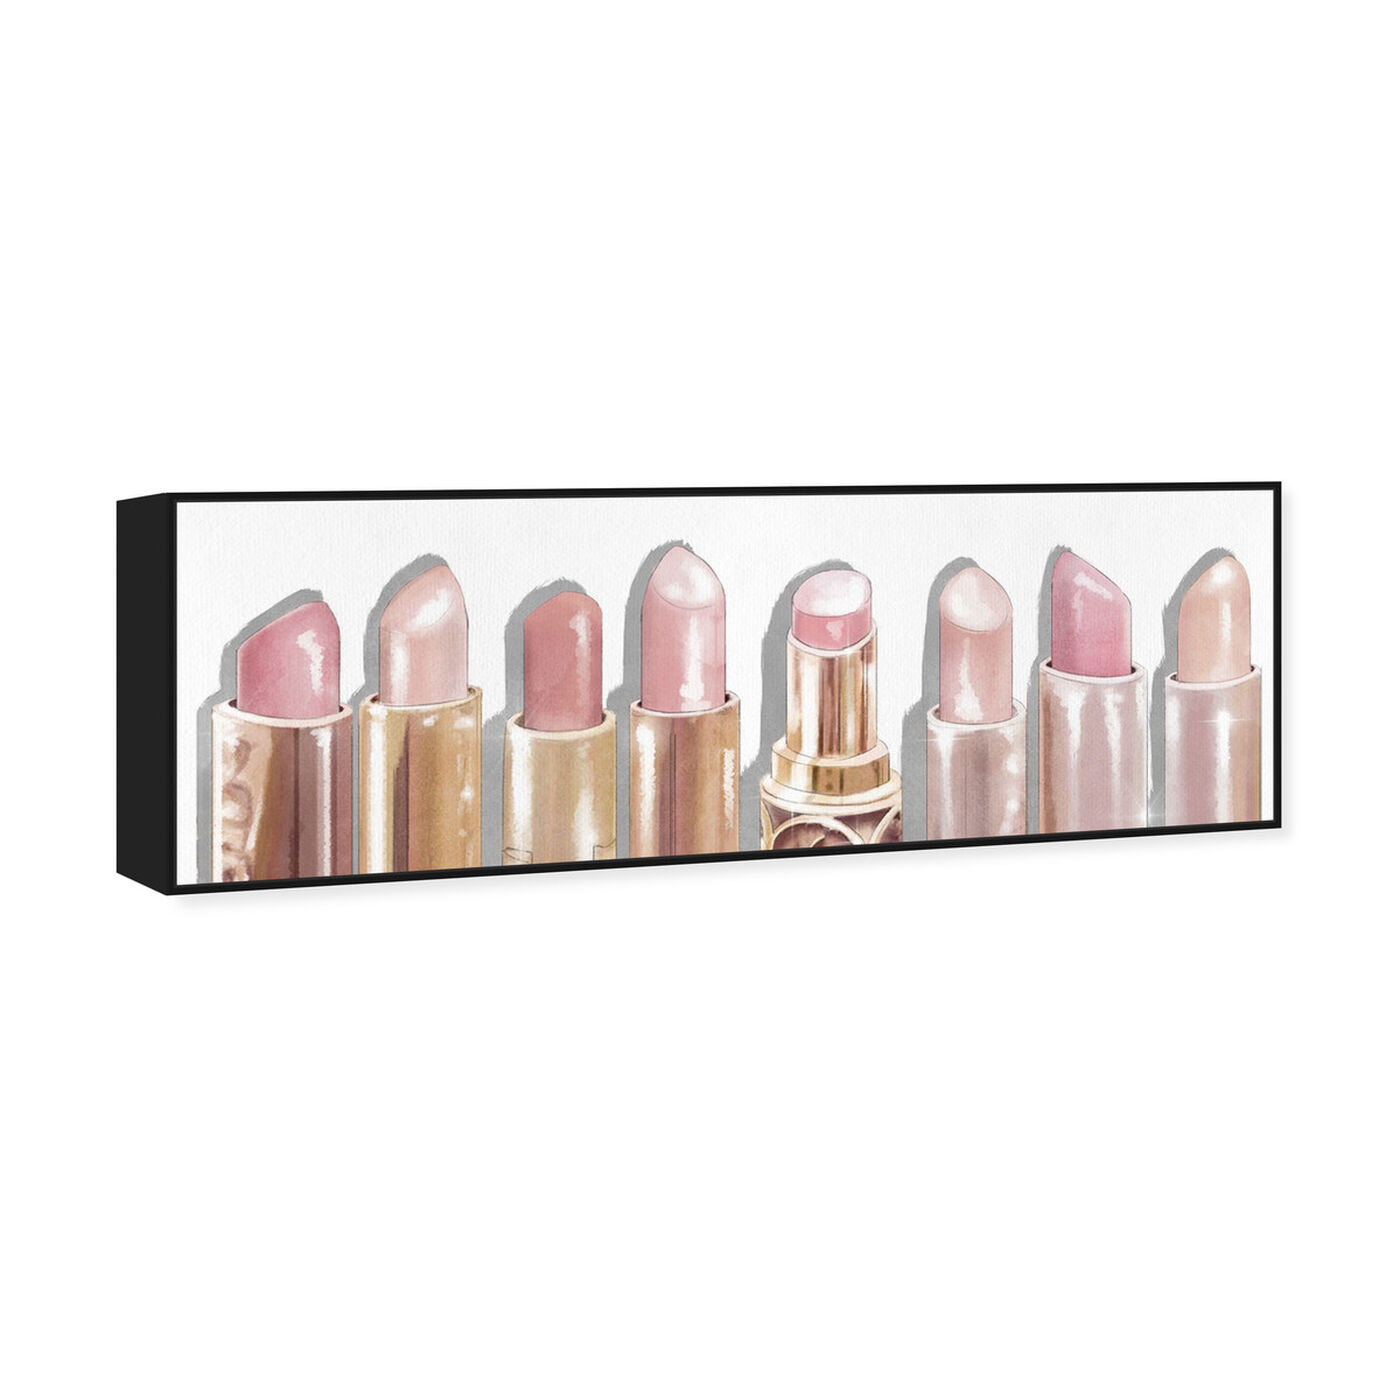 Angled view of Lipstick Shades featuring fashion and glam and makeup art.